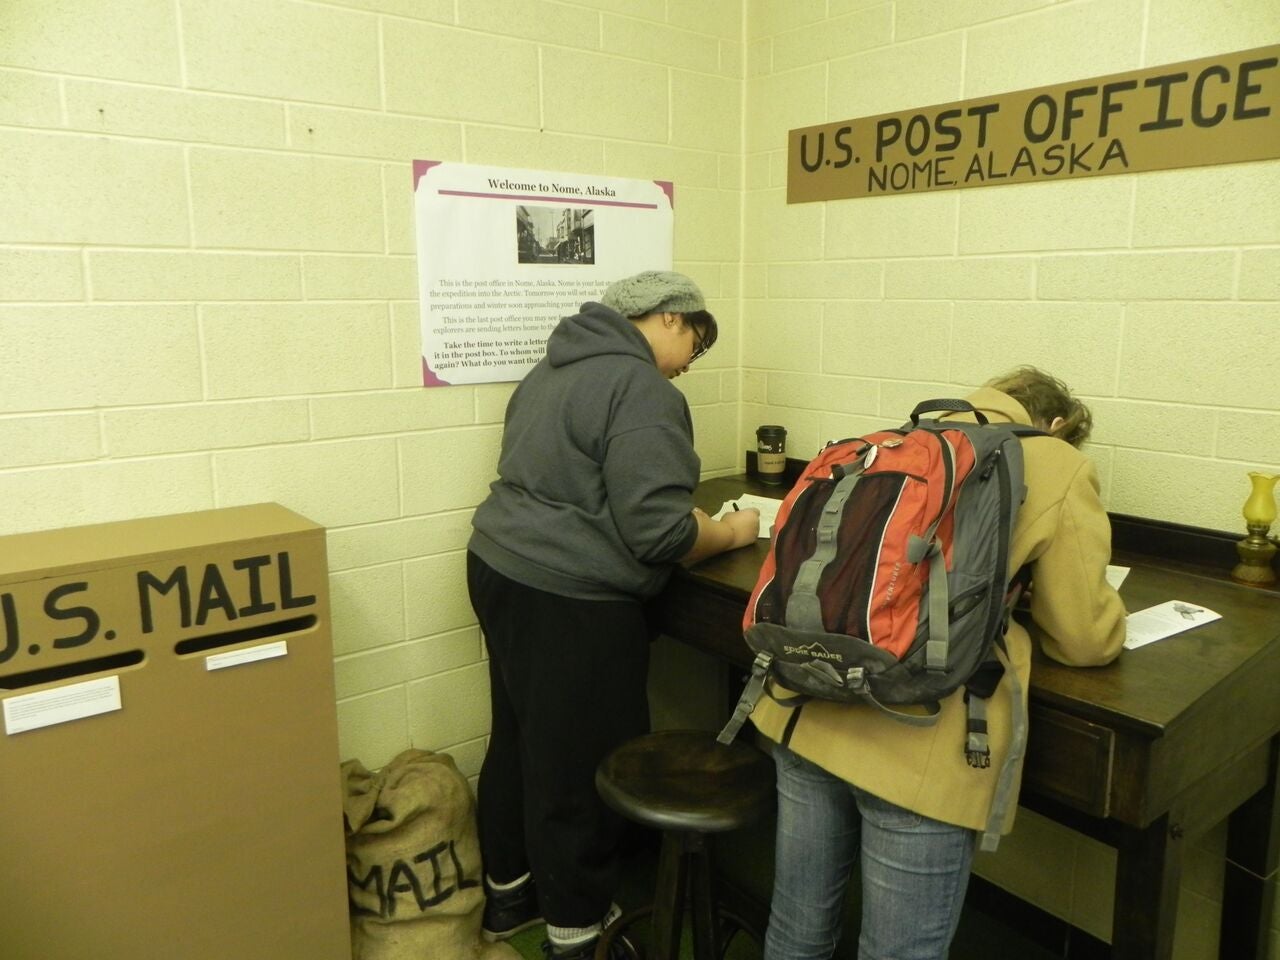 Two people at the exhibit in the "U.S. Post office"